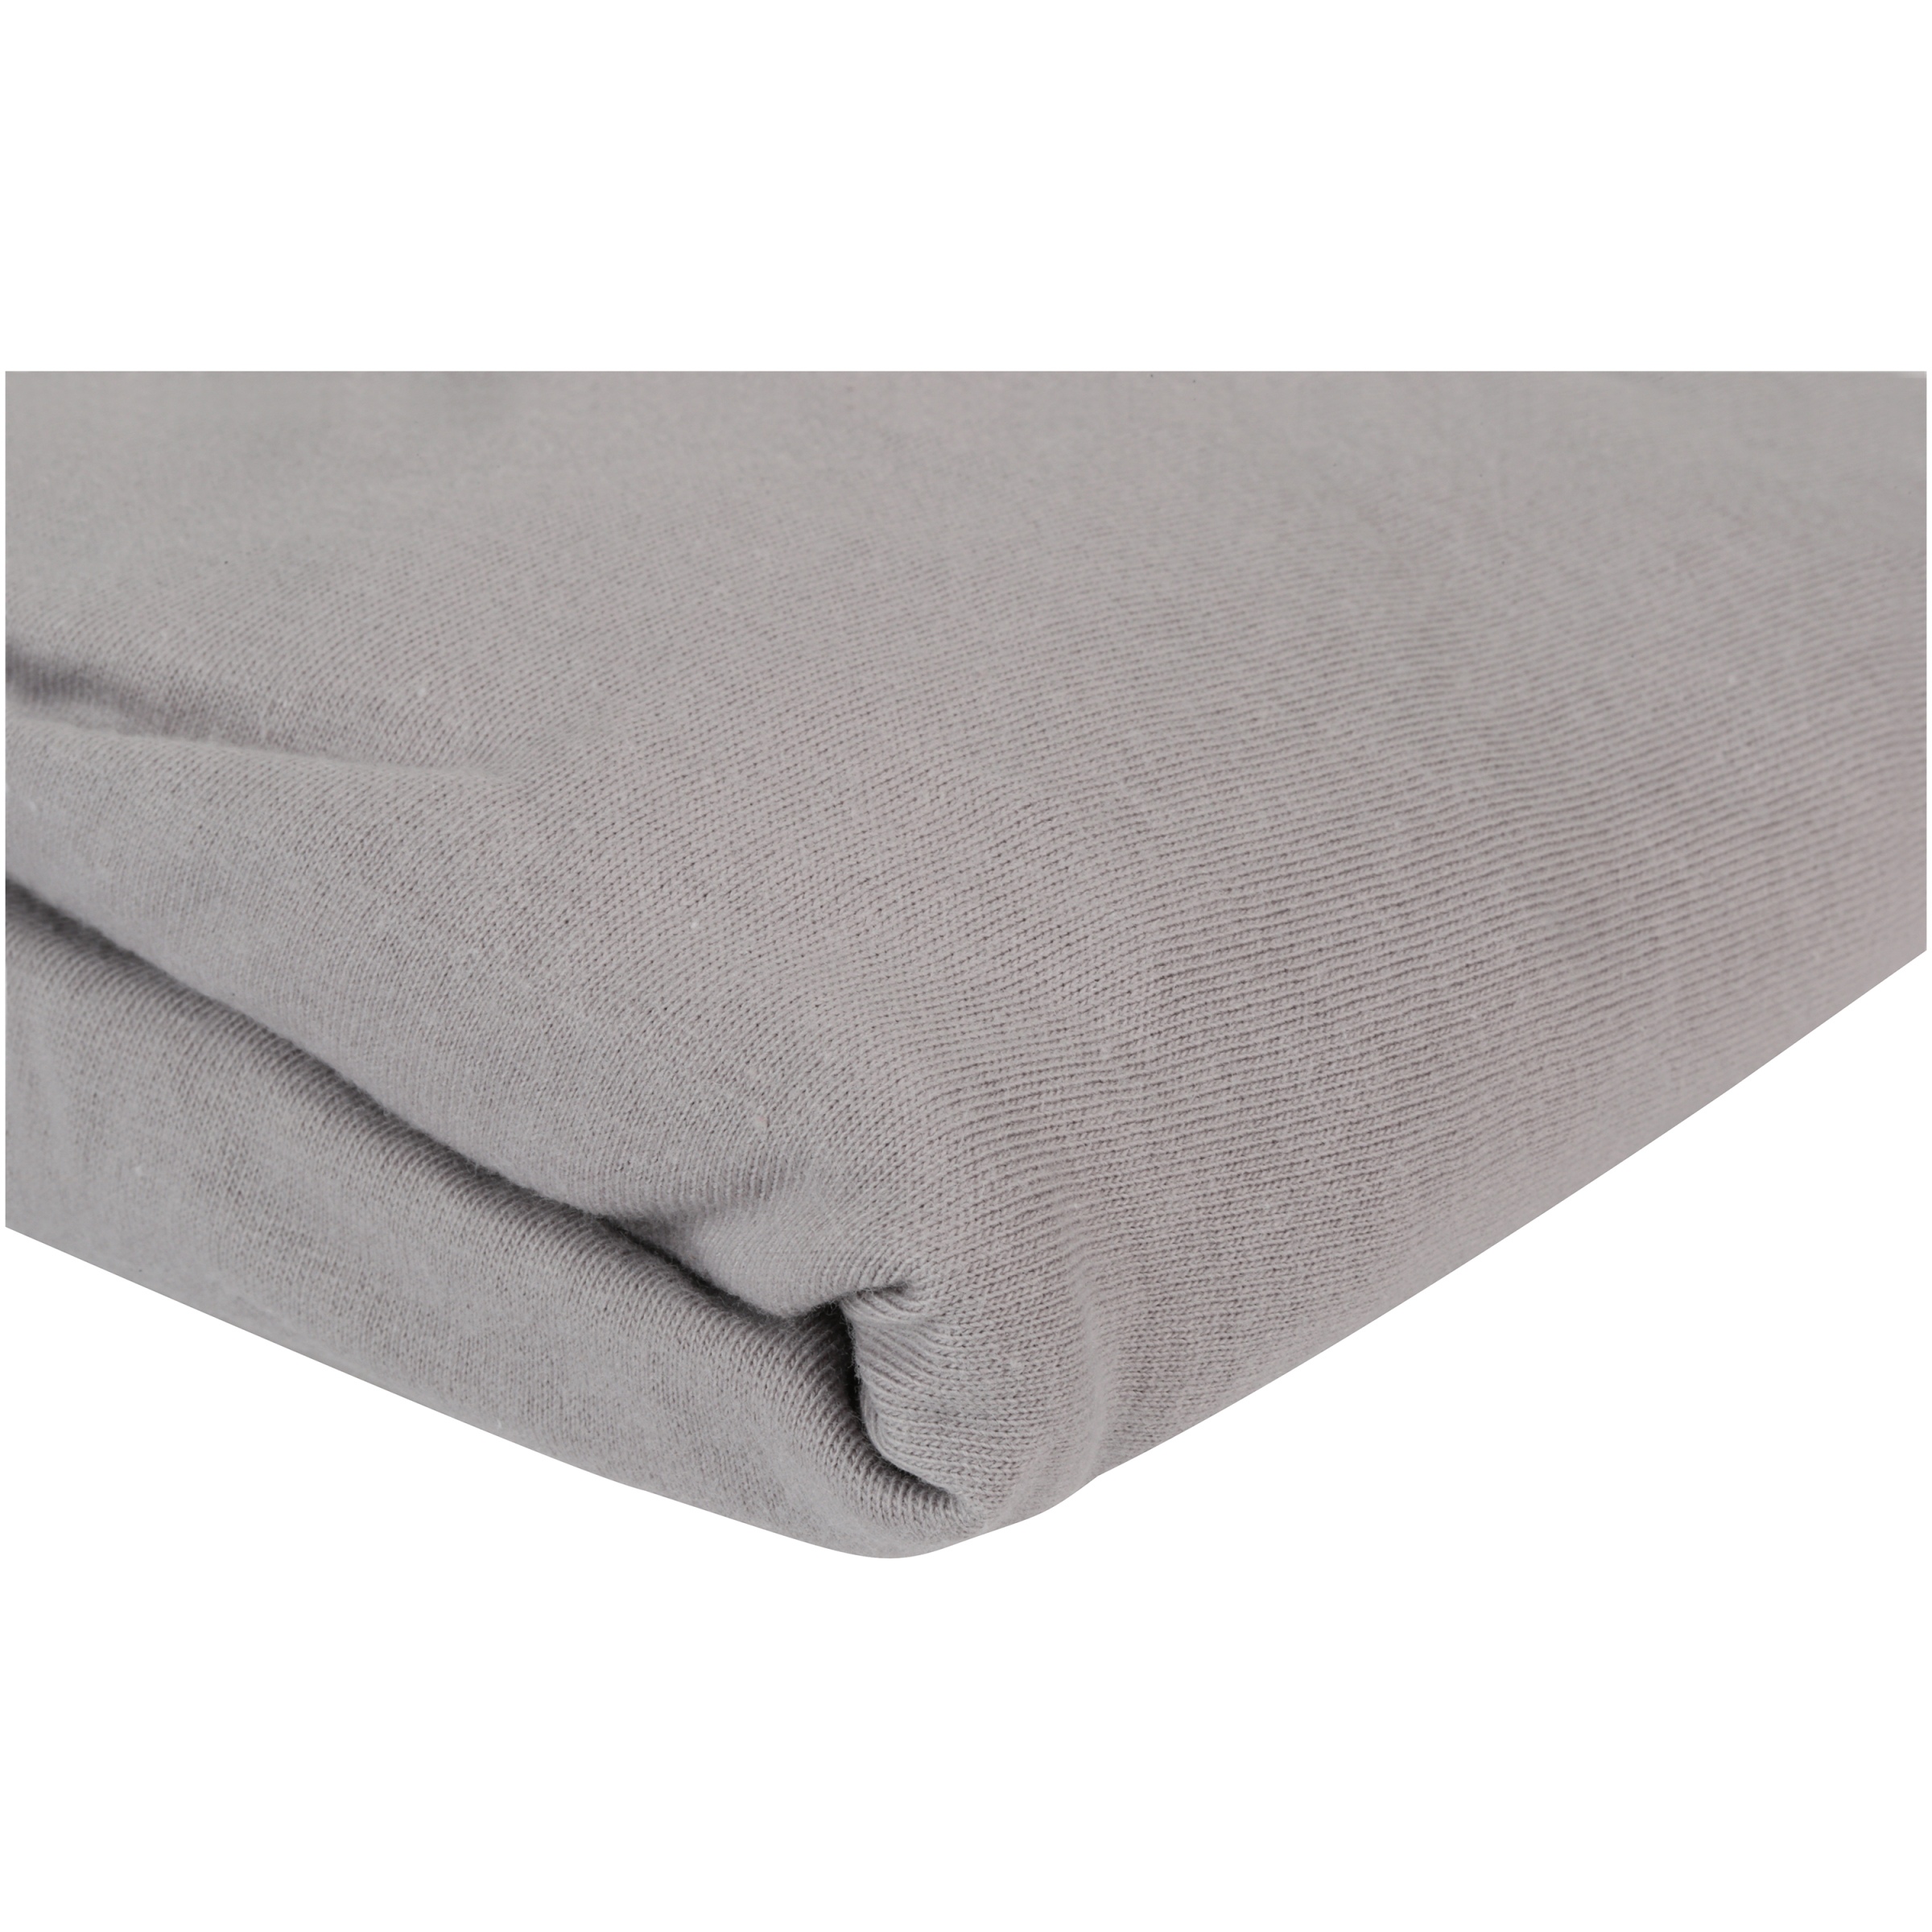 TL Care 100% Natural Cotton Value Jersey Knit Fitted Pack N Play Playard Sheet, Gray, Soft Breathable, for Boys and Girls - image 2 of 2